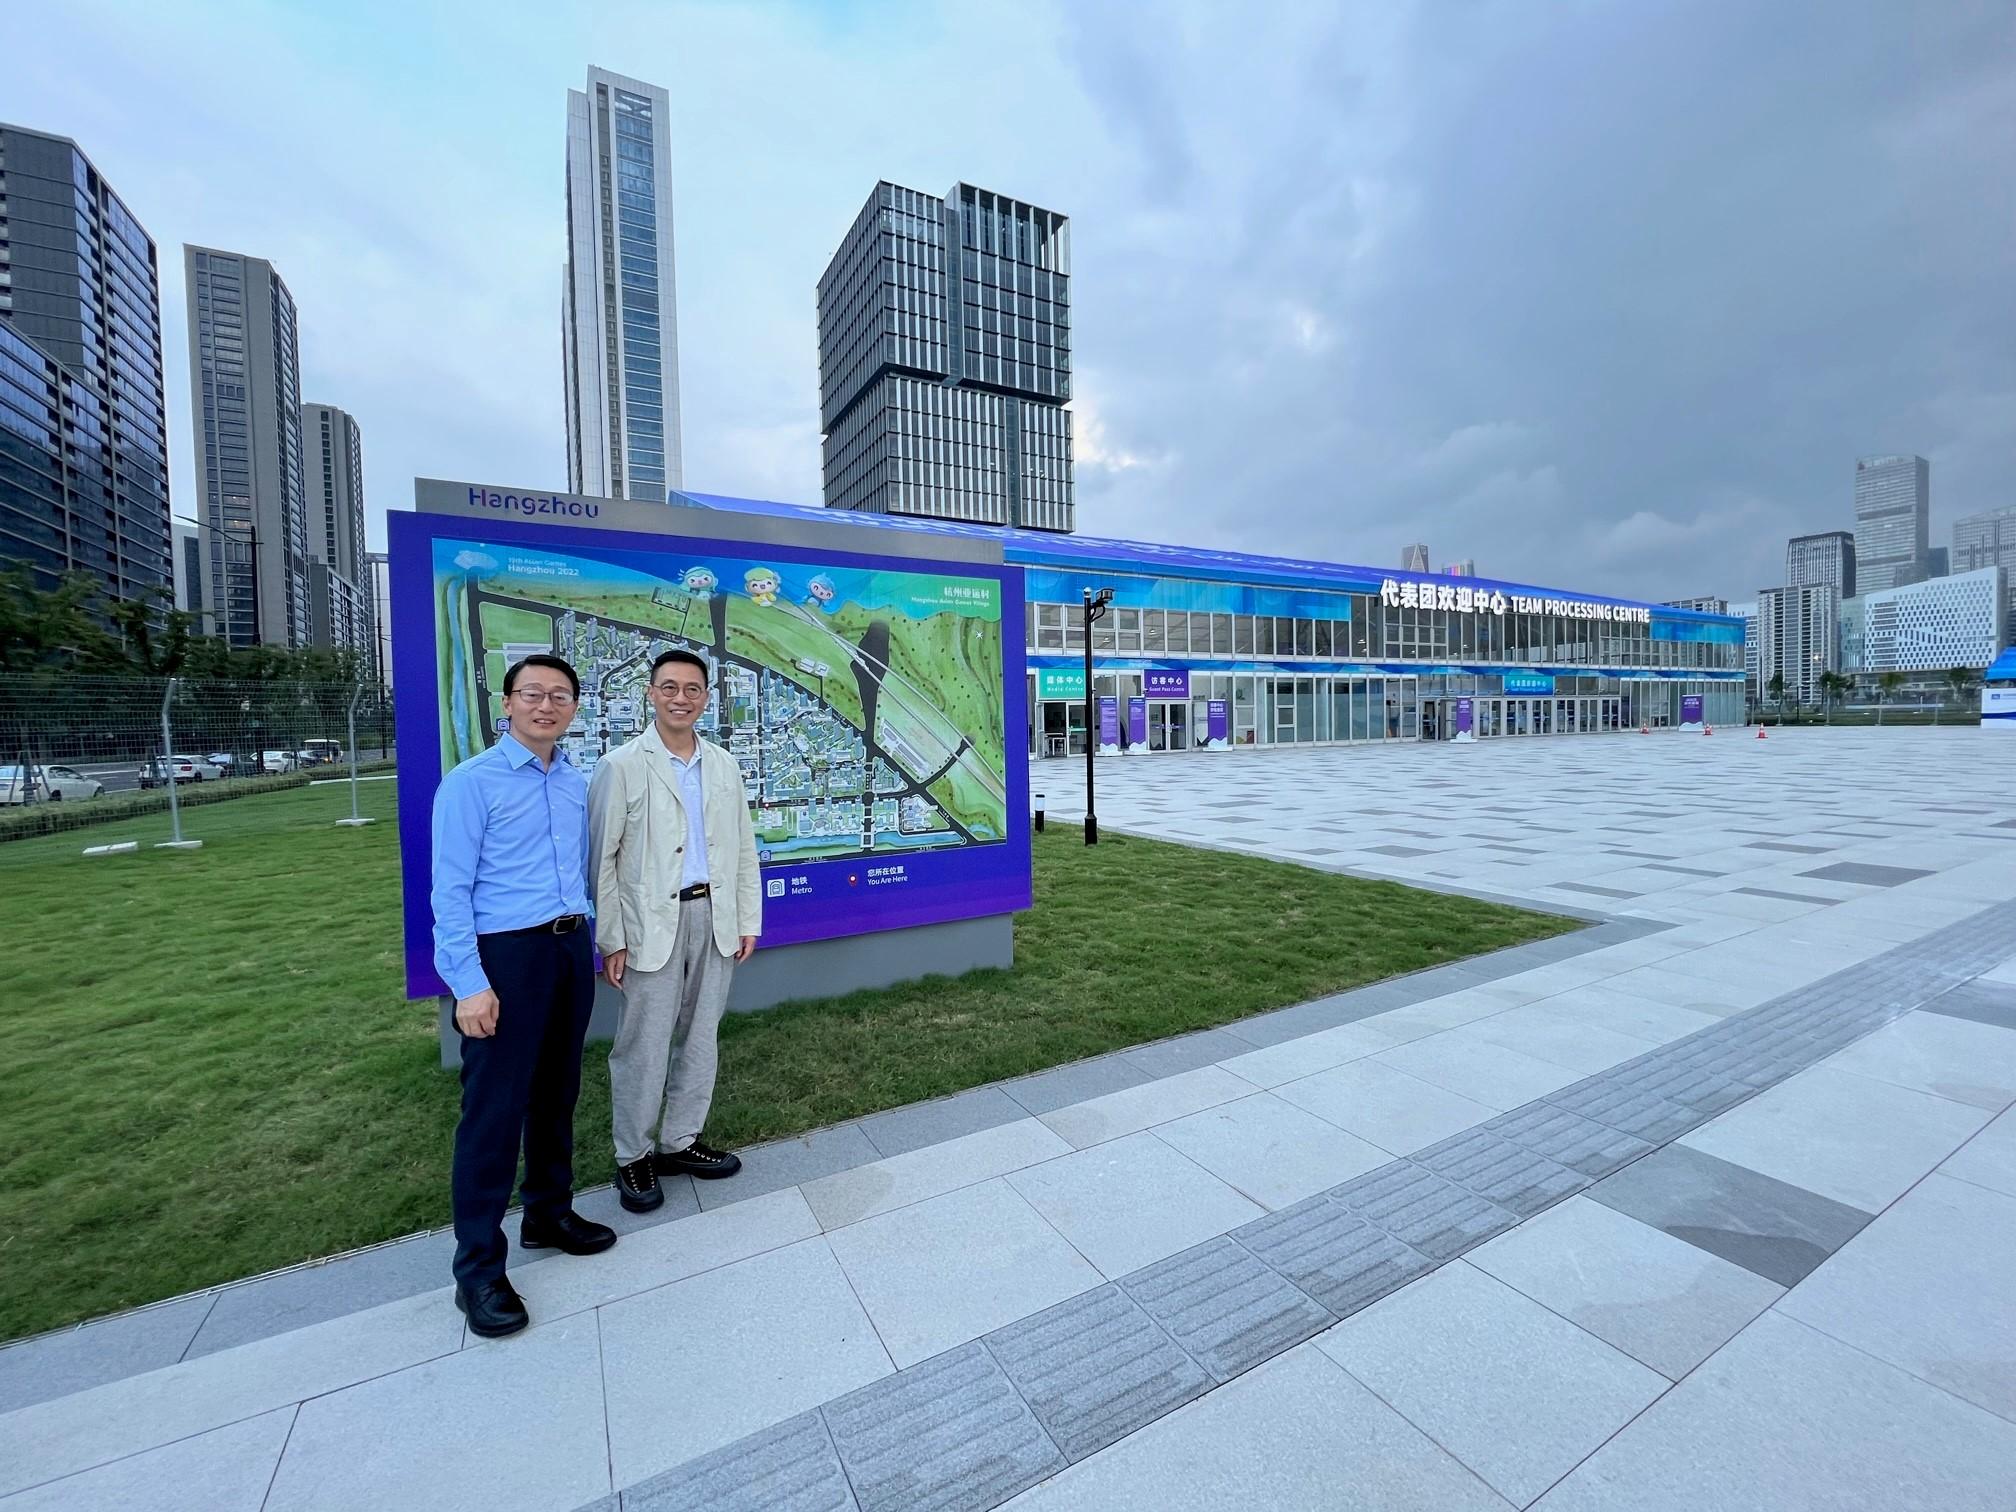 The Secretary for Culture, Sports and Tourism, Mr Kevin Yeung (right), today (August 1) visited the Hangzhou Asian Games Village with the Director of Leisure and Cultural Services, Mr Vincent Liu (left), to learn about the reception arrangements for athletes.

